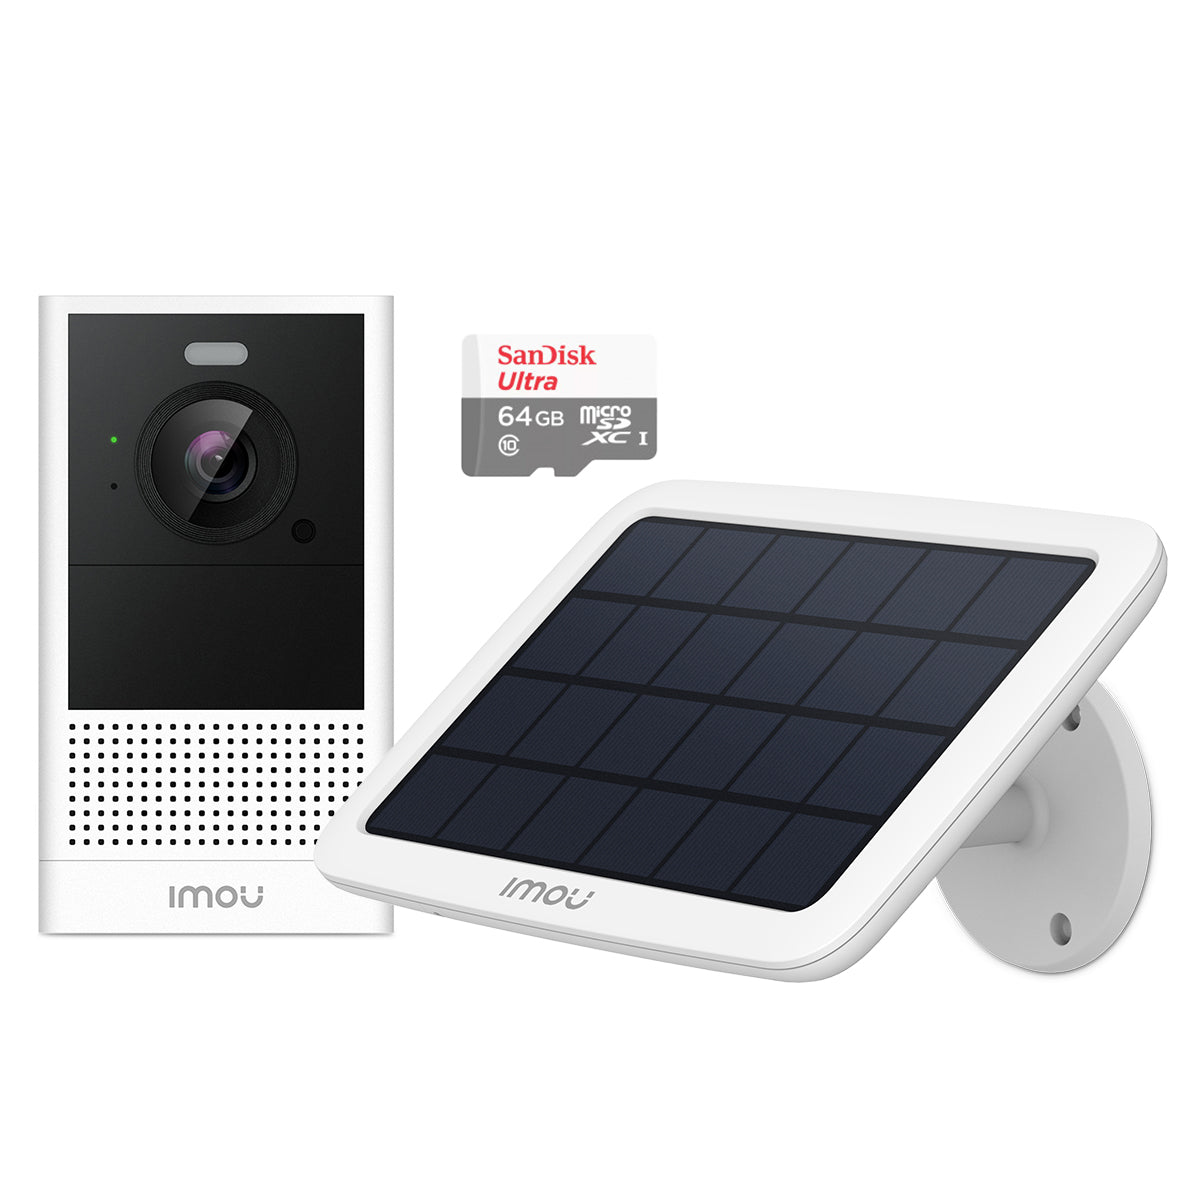 Imou-Cell-2-plus-Solar-Panel-plus-SanDisk-Ultra-64GB-Micro-SDXC-Card-Products-Front-View-CC473-6-CH54-2-PS470